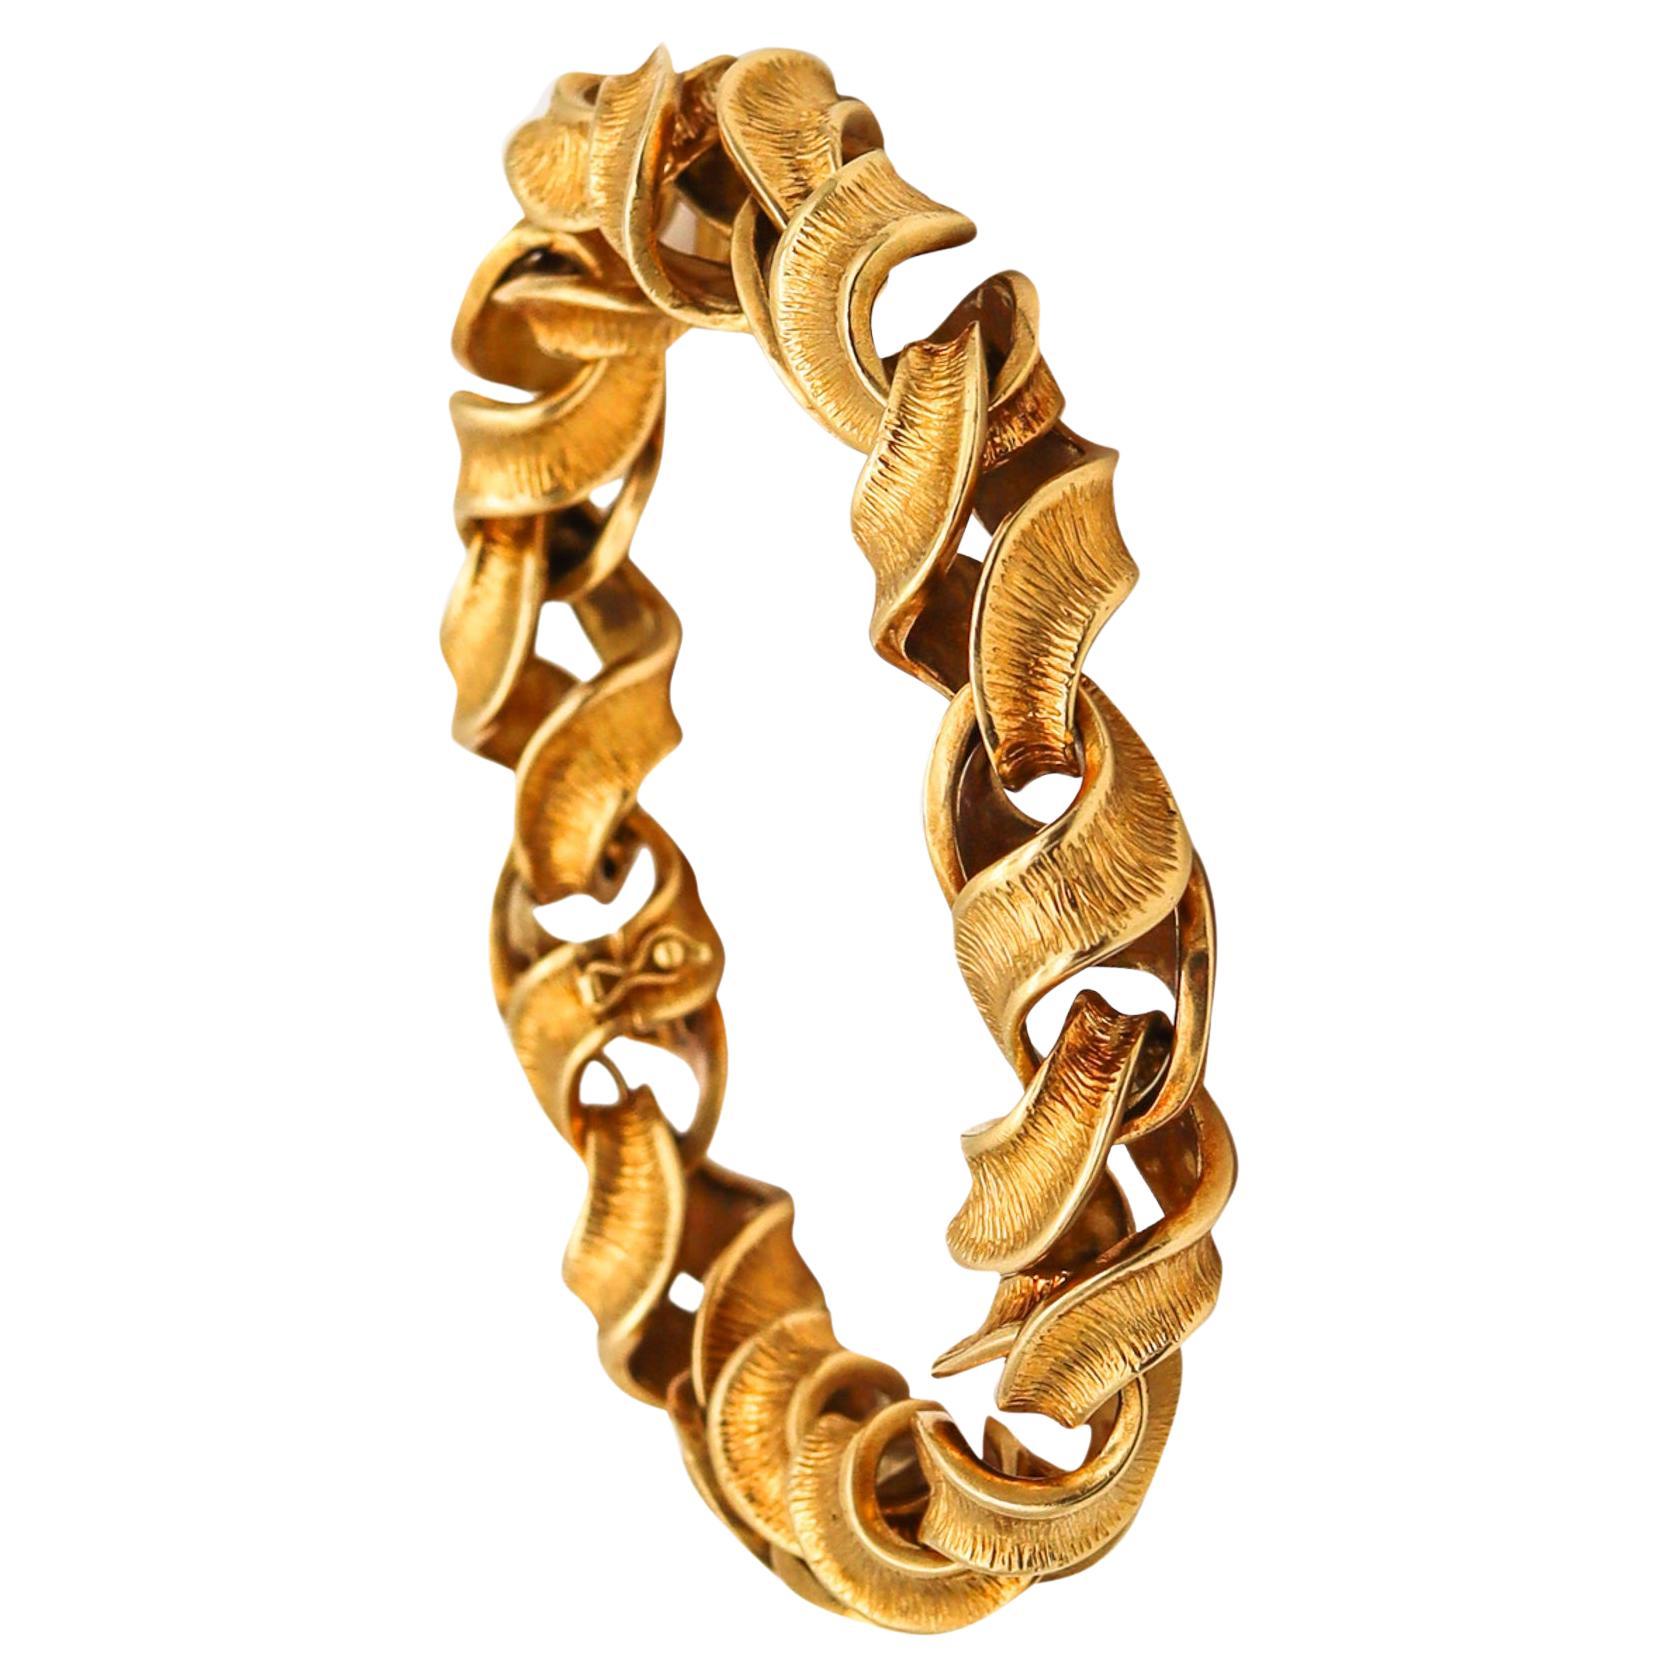 Riccardo Masella 1960 Modernist Twisted Bracelet In Solid 18Kt Yellow Gold For Sale